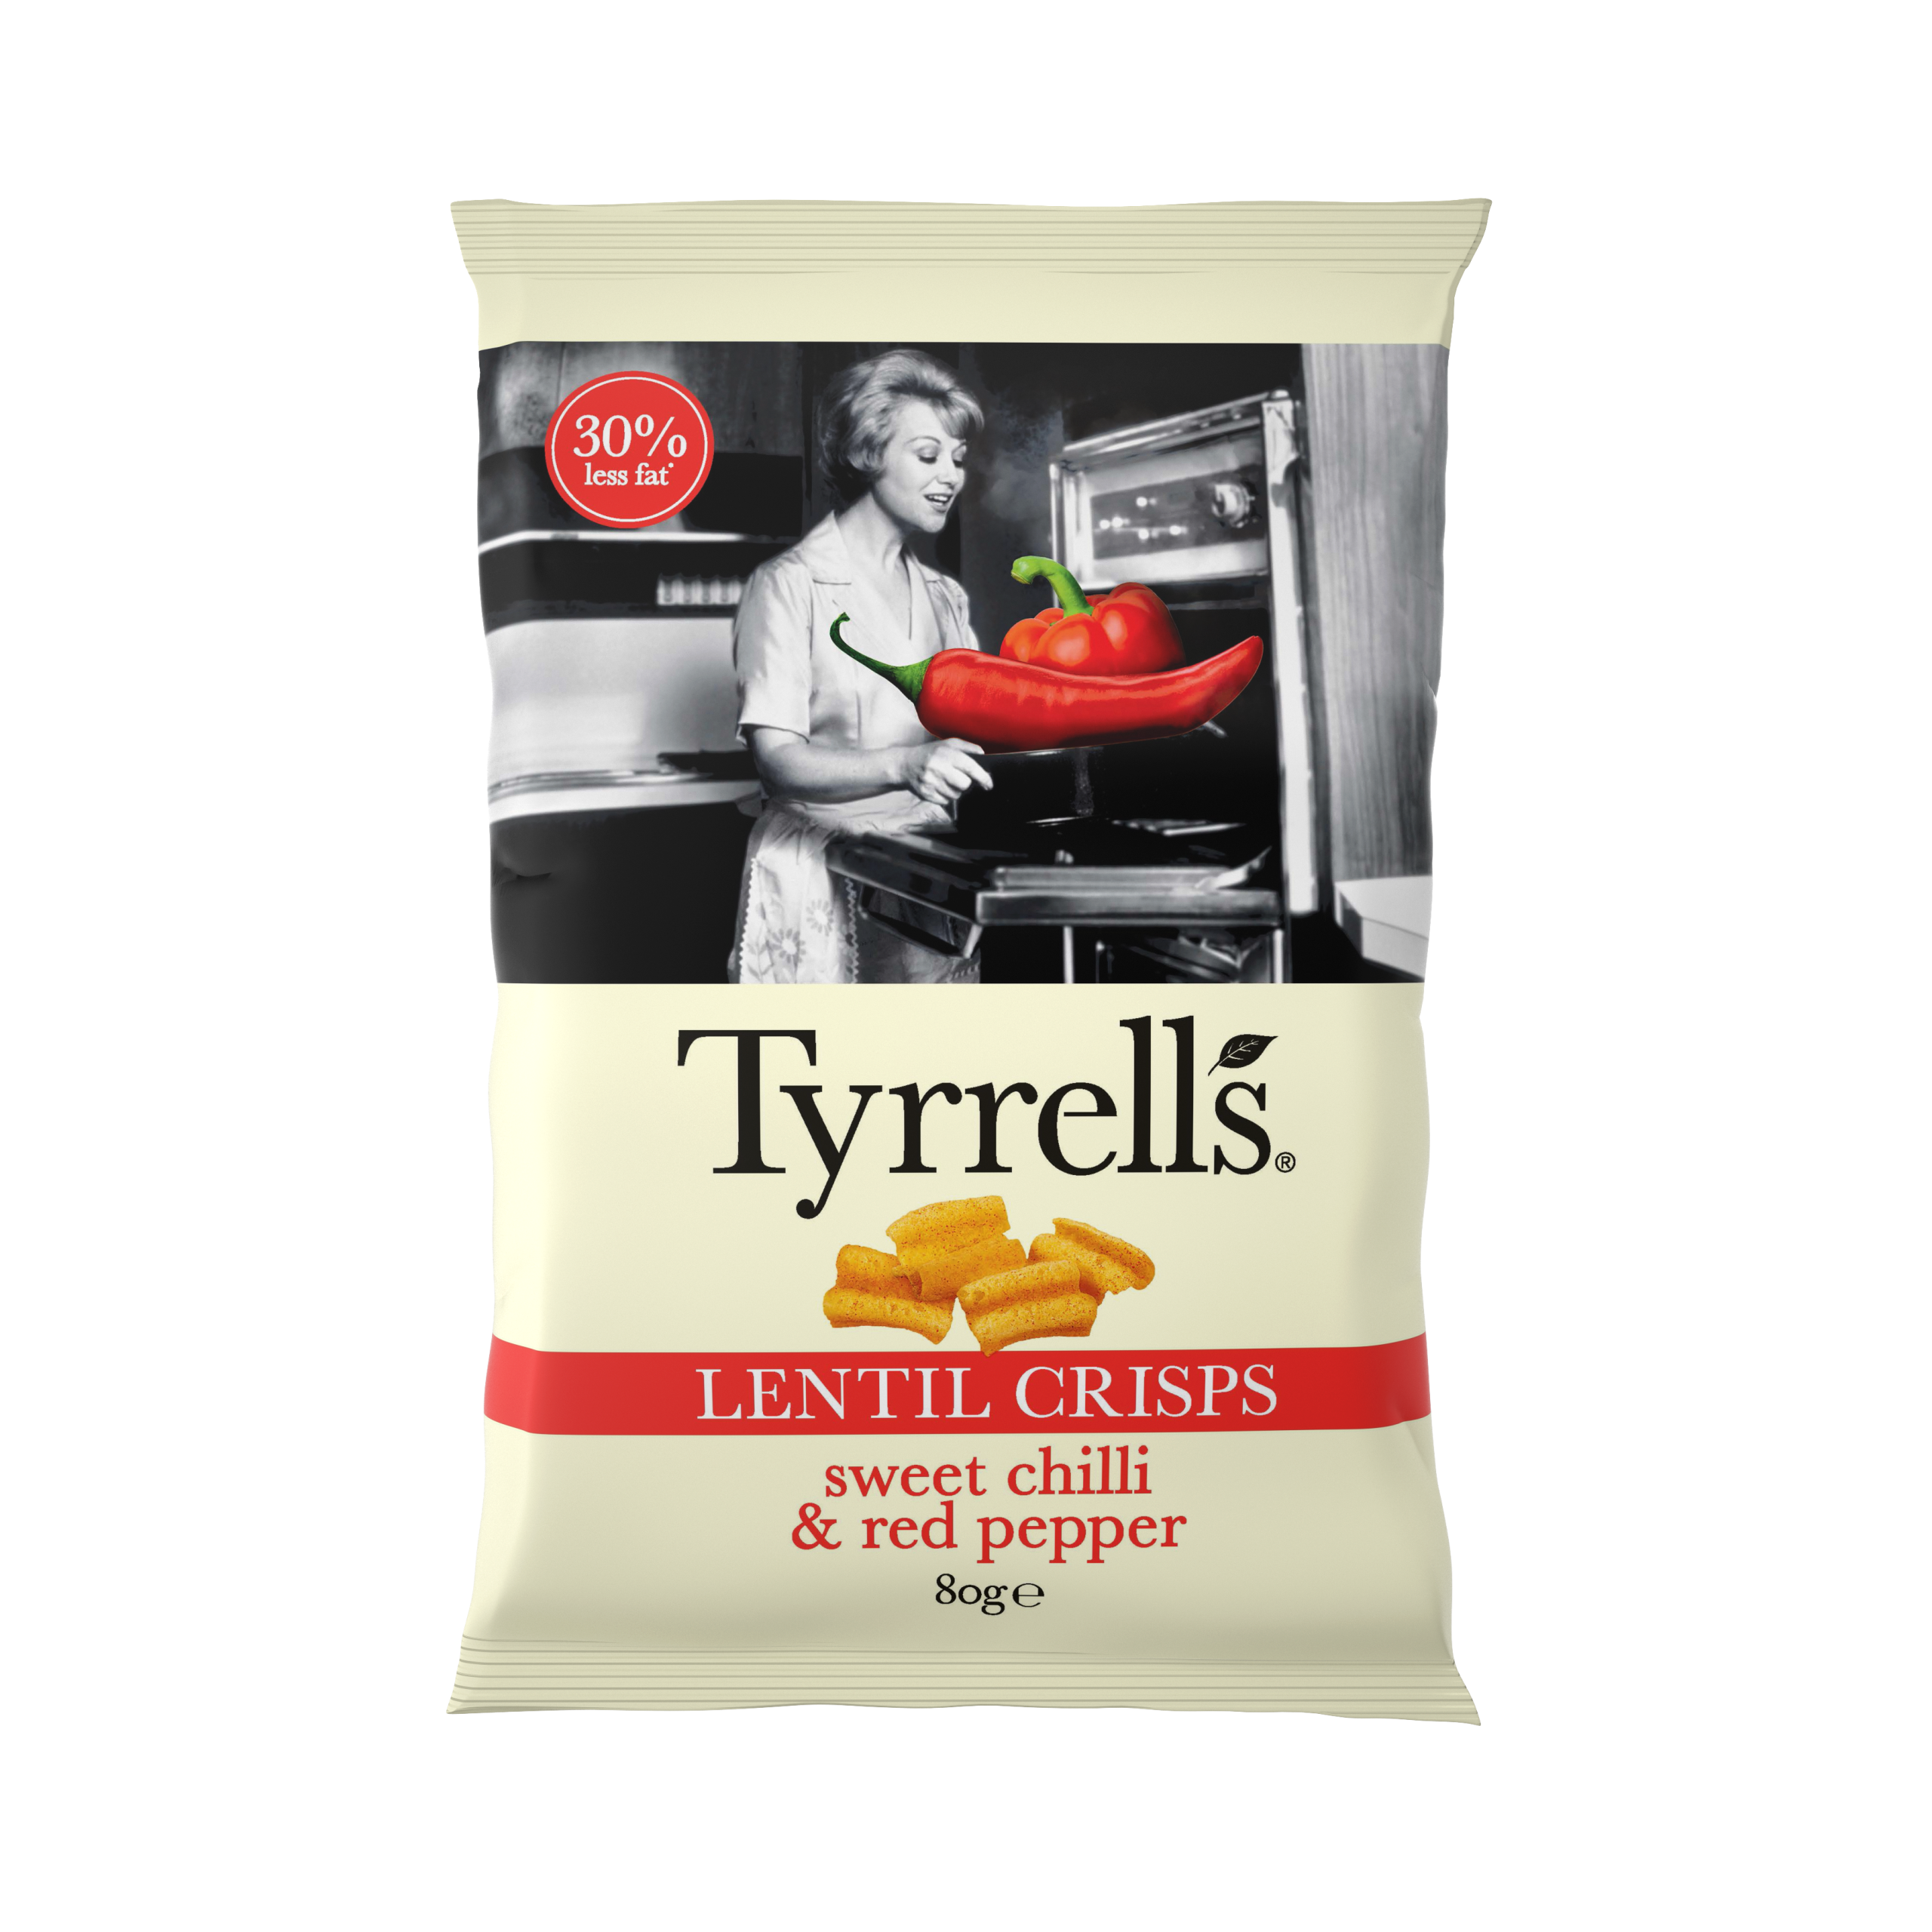 KP Snacks launches new campaign for Tyrrells